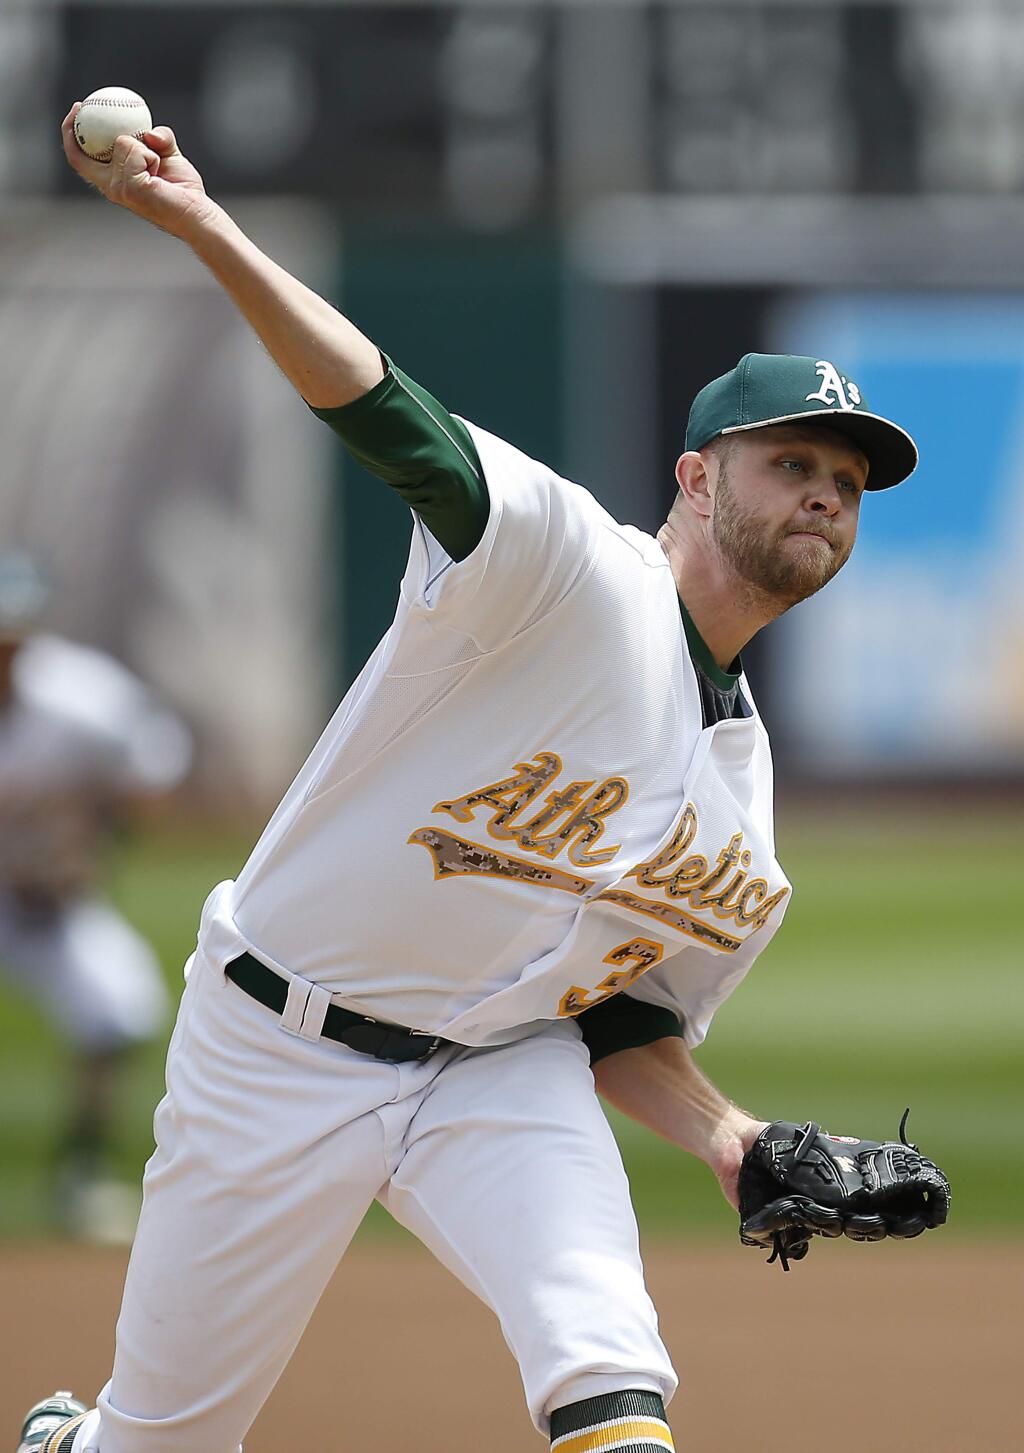 Oakland Athletics starting pitcher Jesse Hahn works against the Detroit Tigers in the first inning of a baseball game Monday, May 25, 2015, in Oakland, Calif. (AP Photo/Tony Avelar)